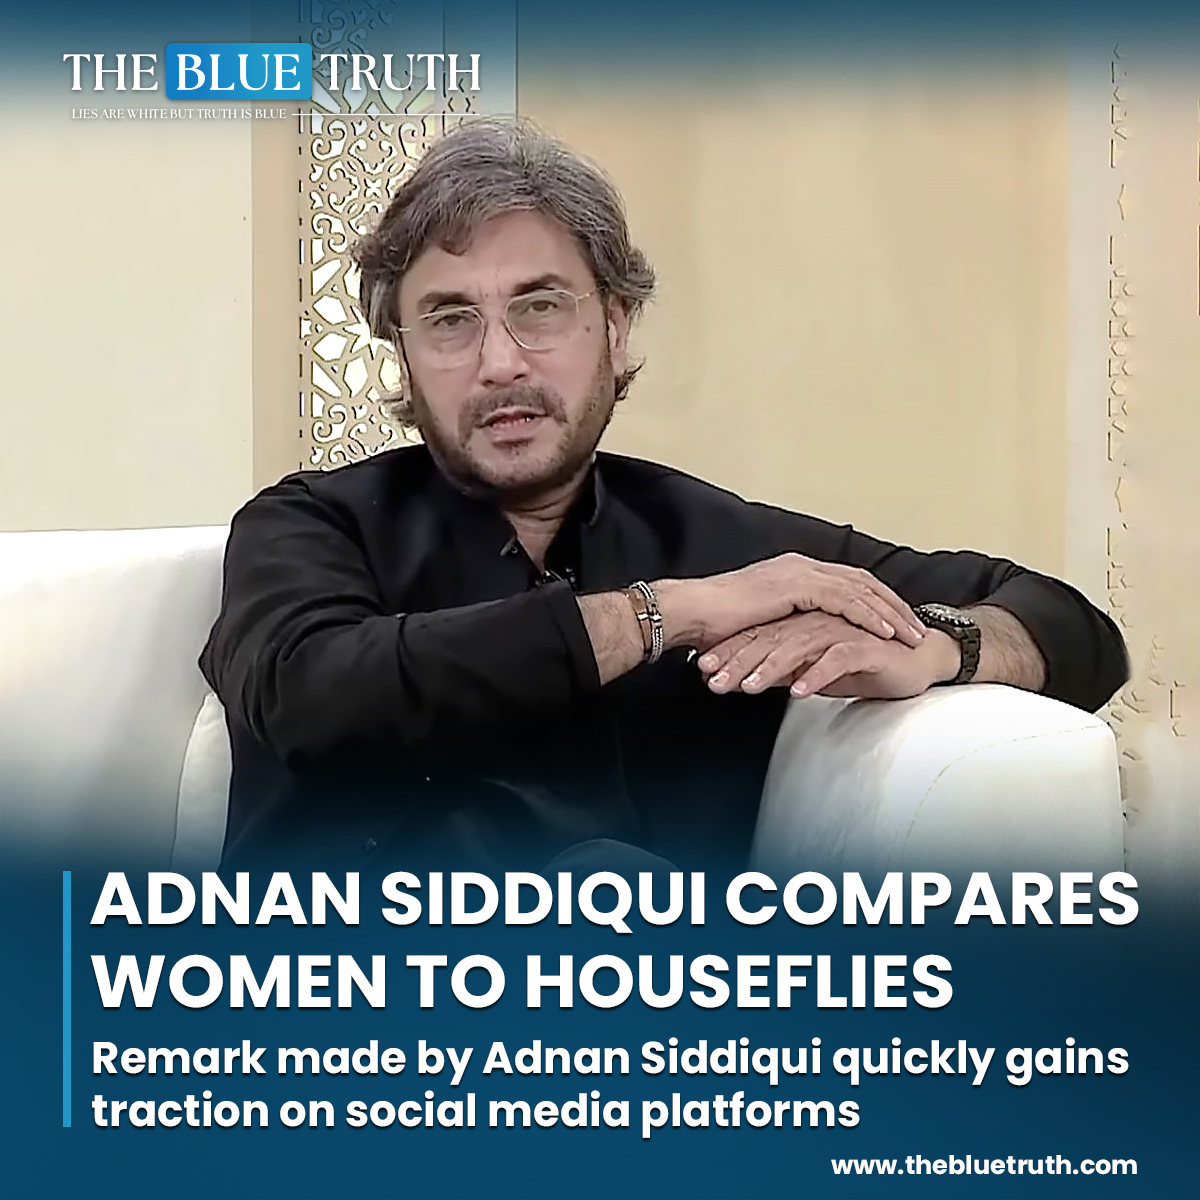 The incident has prompted discussions regarding the importance of responsible communication and the impact of language on societal perceptions.
#AdnanSiddiqui #Controversy #GenderSensitivity #tbt #TheBlueTruth